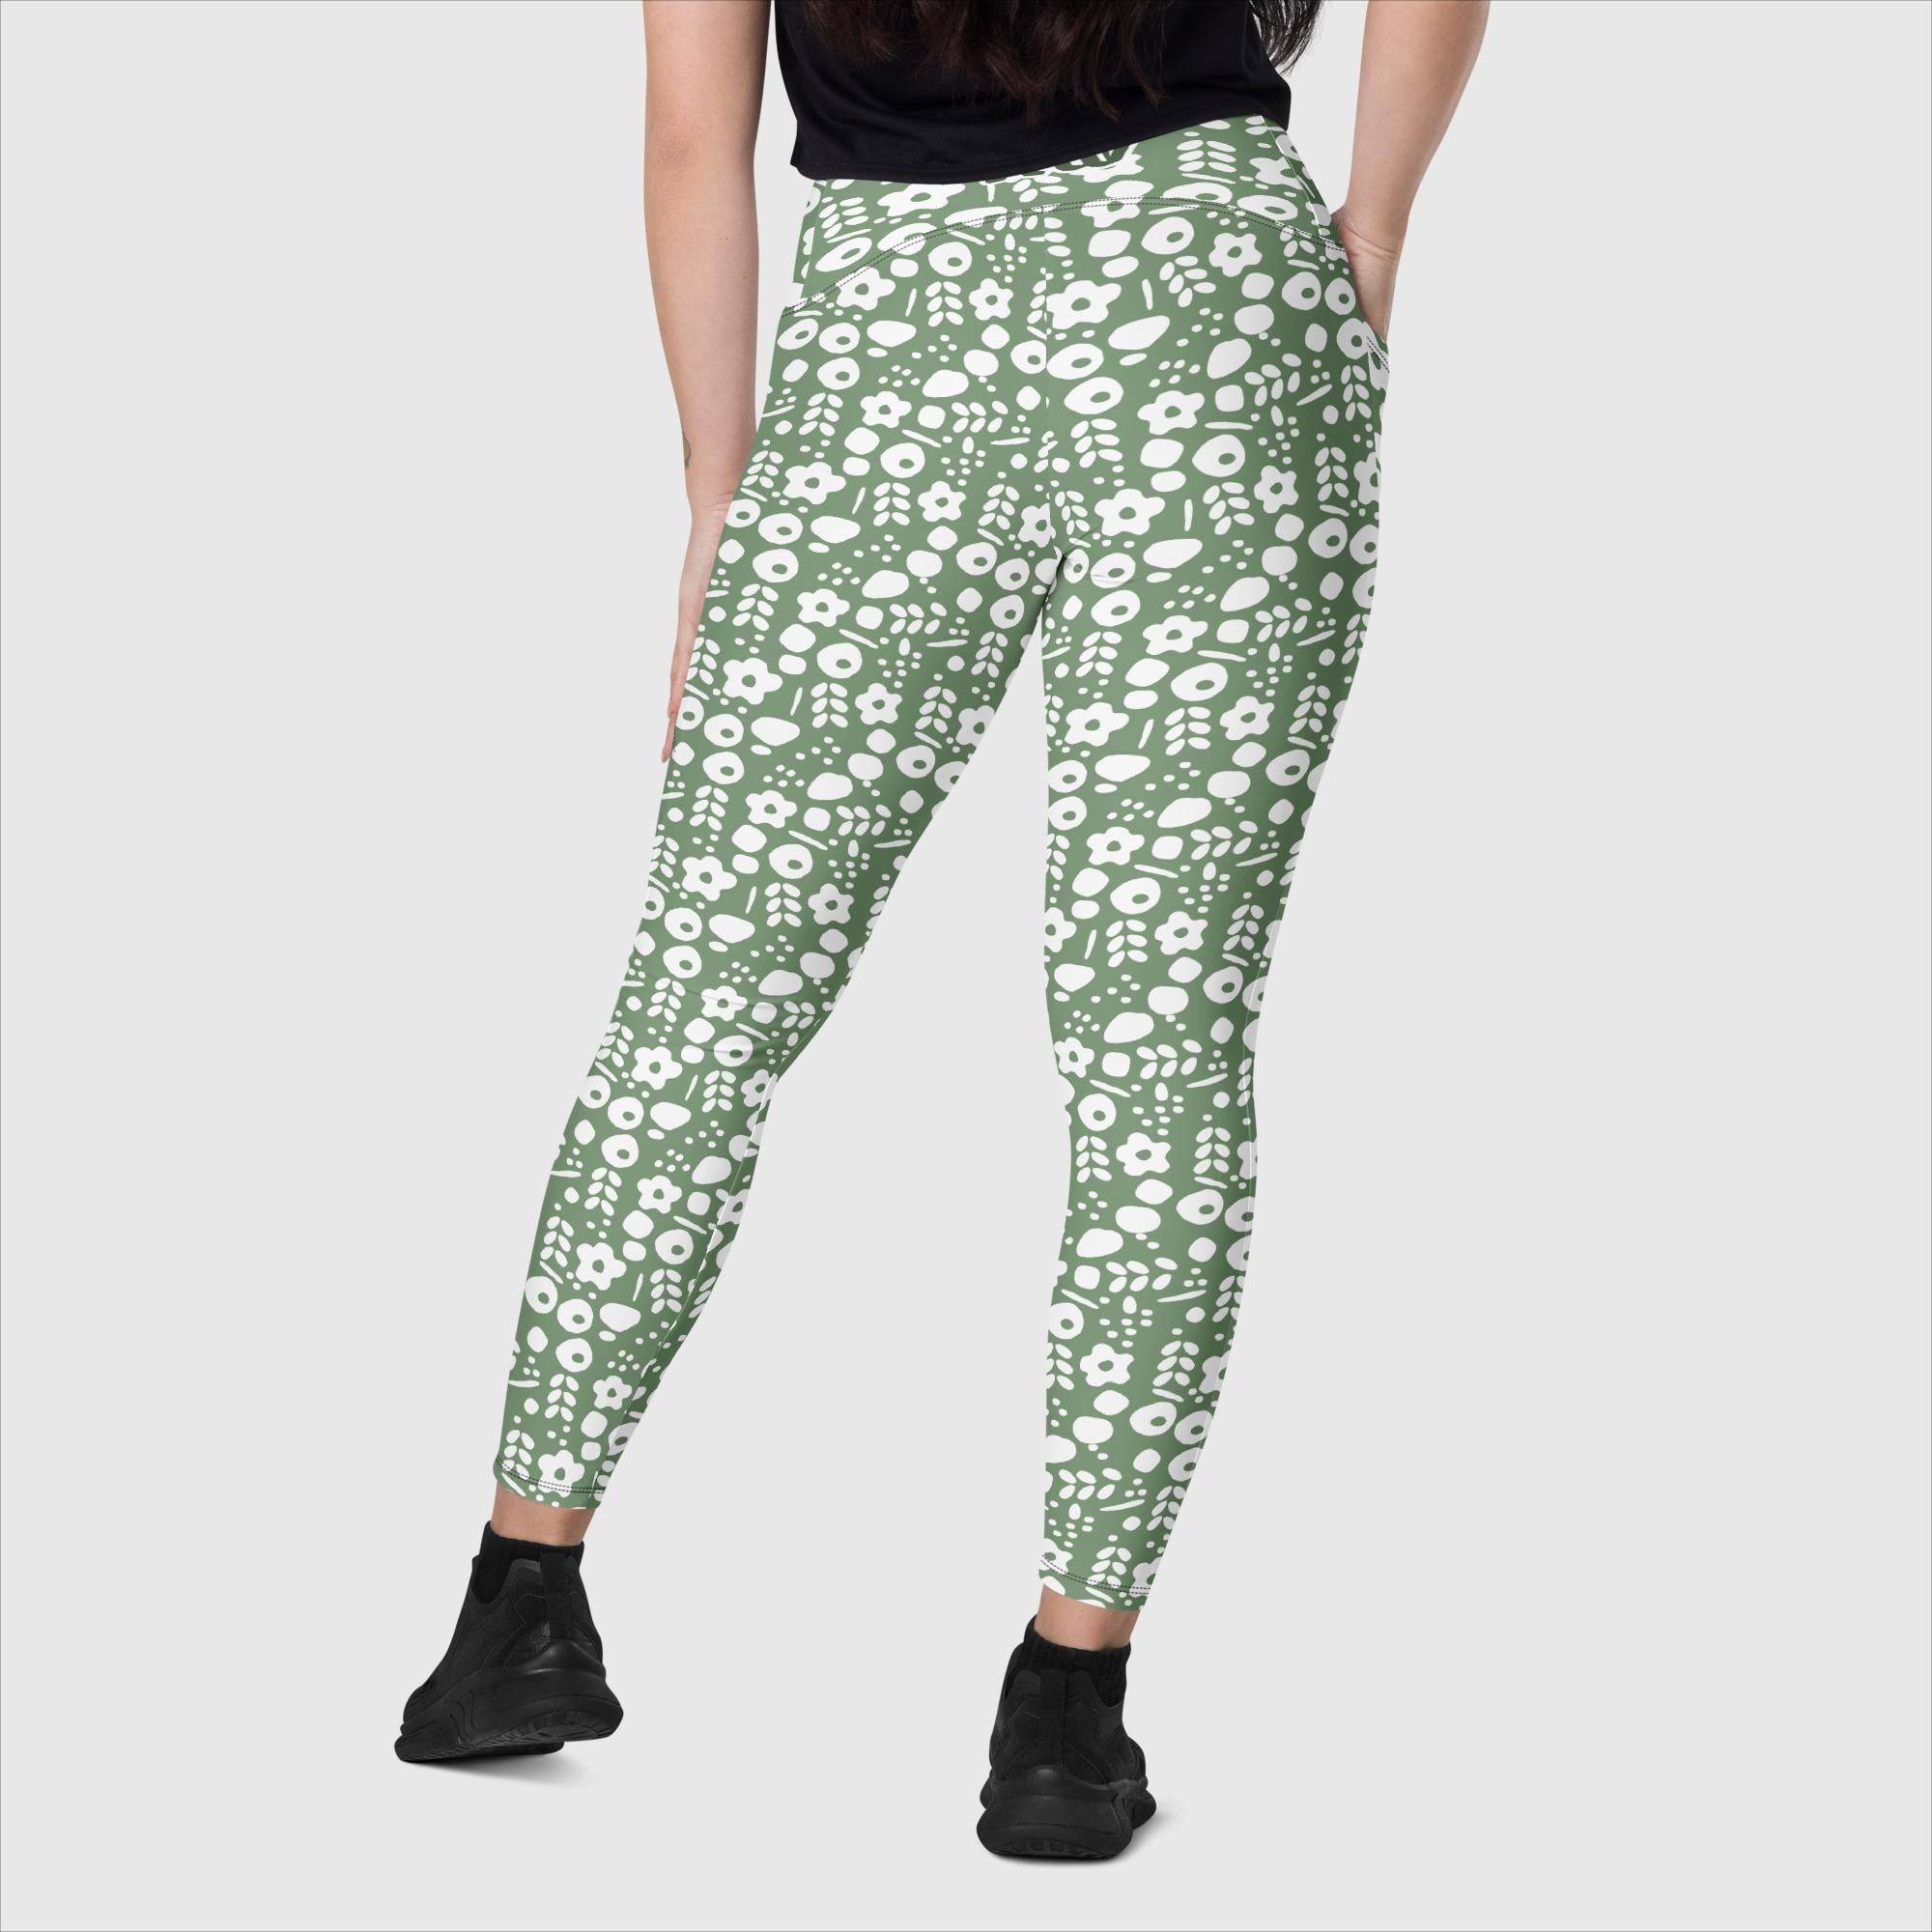 Women’s Leggings with Side Pockets High Waist Support - Revive Wear     Handmade Pocket Leggings for Yoga, Pilates & Meditation. High-waisted cut, exceptional comfort and two practical side pockets. Get yours now!